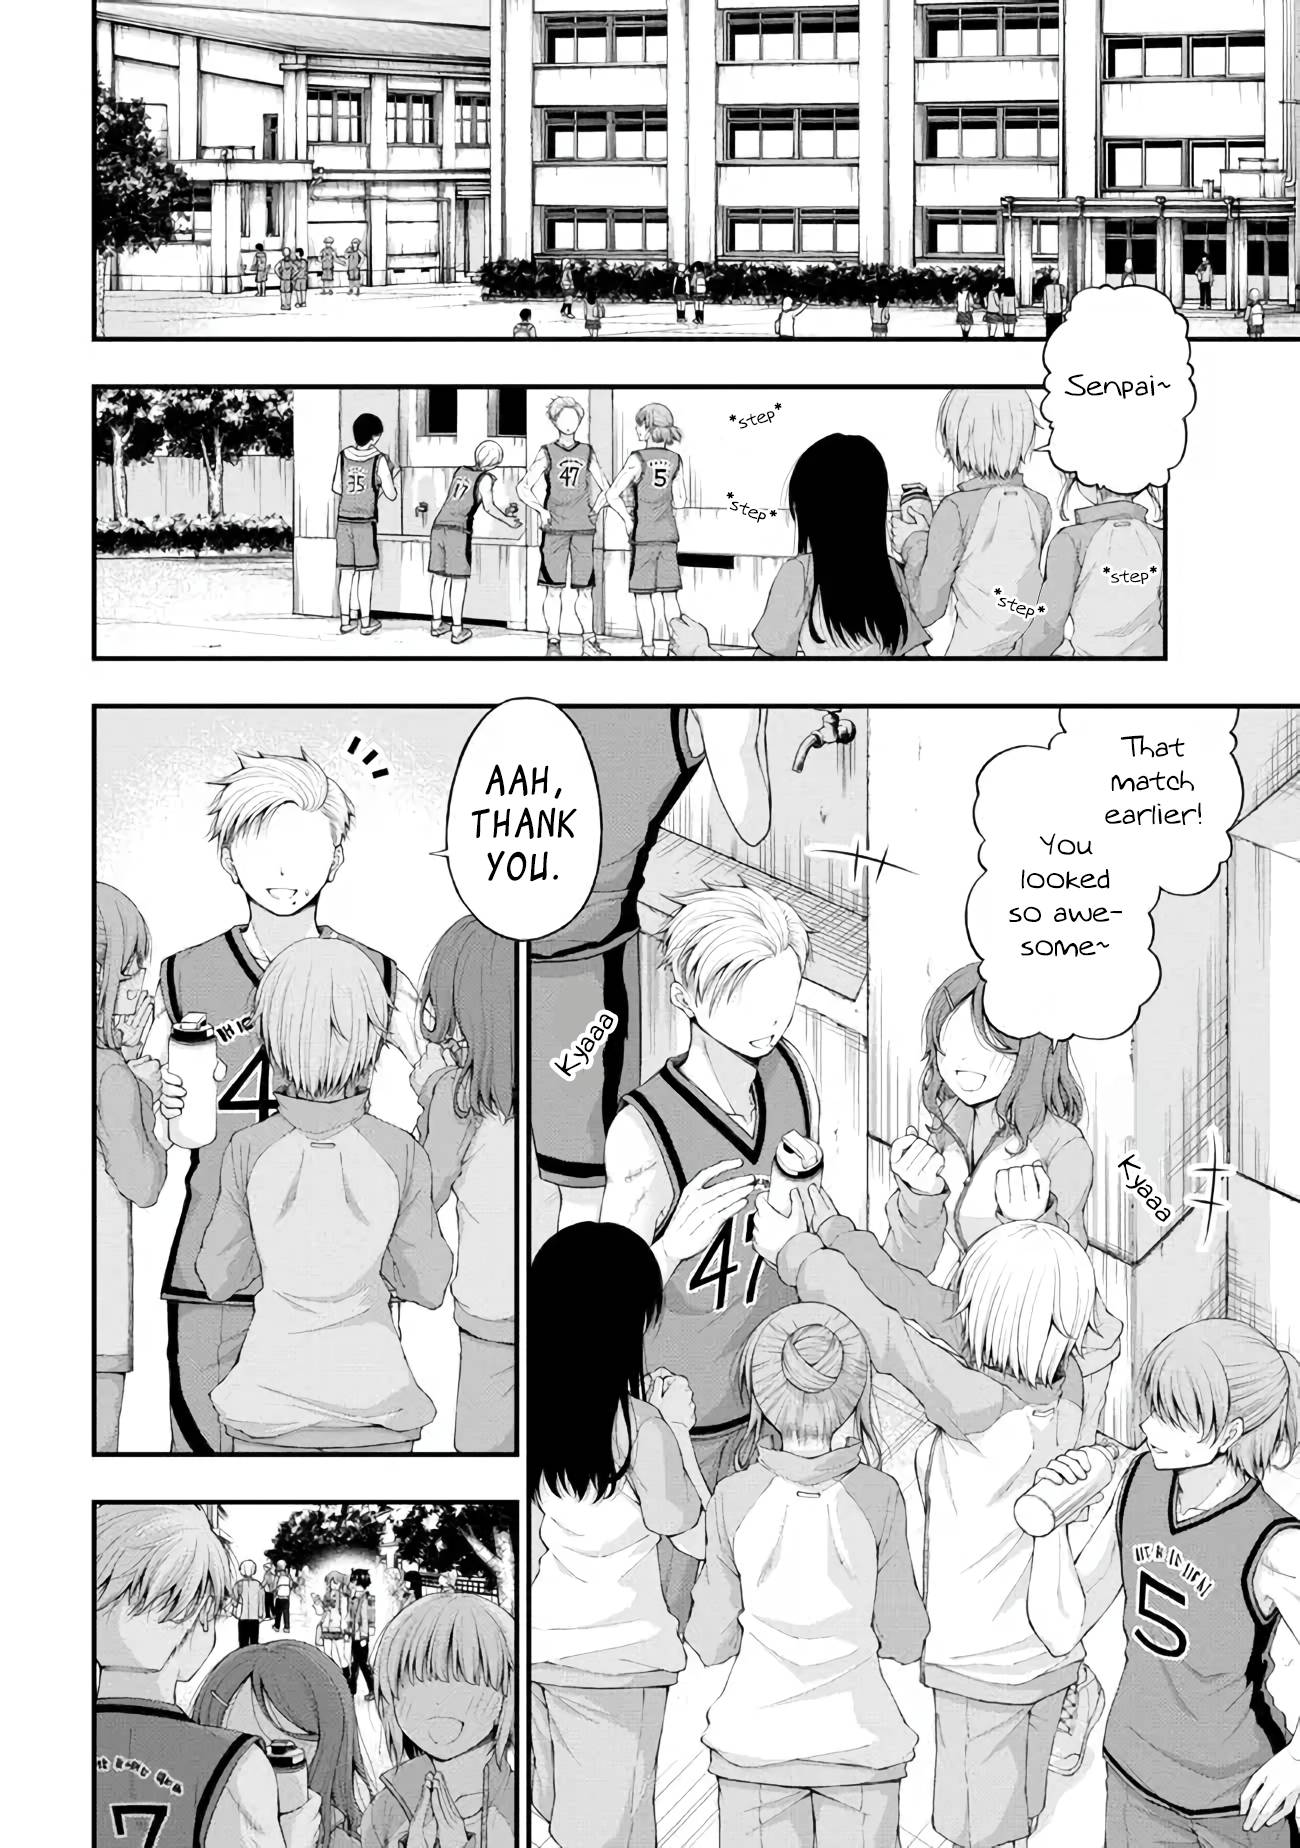 The Gal Who Was Meant to Confess to Me as a Game Punishment - chapter 5 - #6